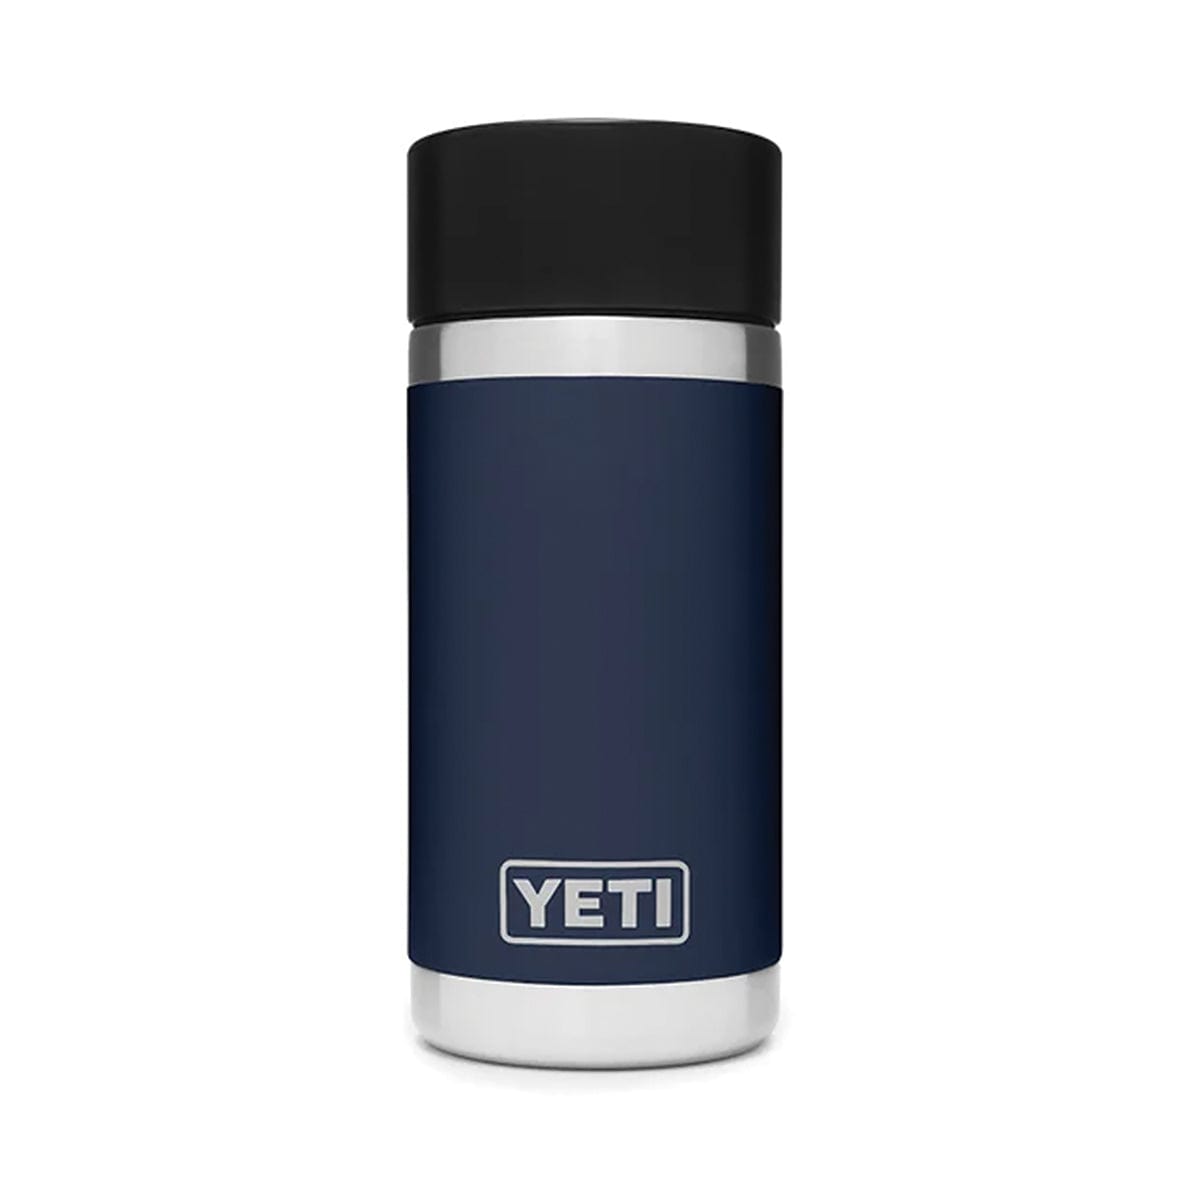 Best Stainless Small Coffee Mug for Travelers - Review Yeti 12oz bottle  with Hot Shot Cap 